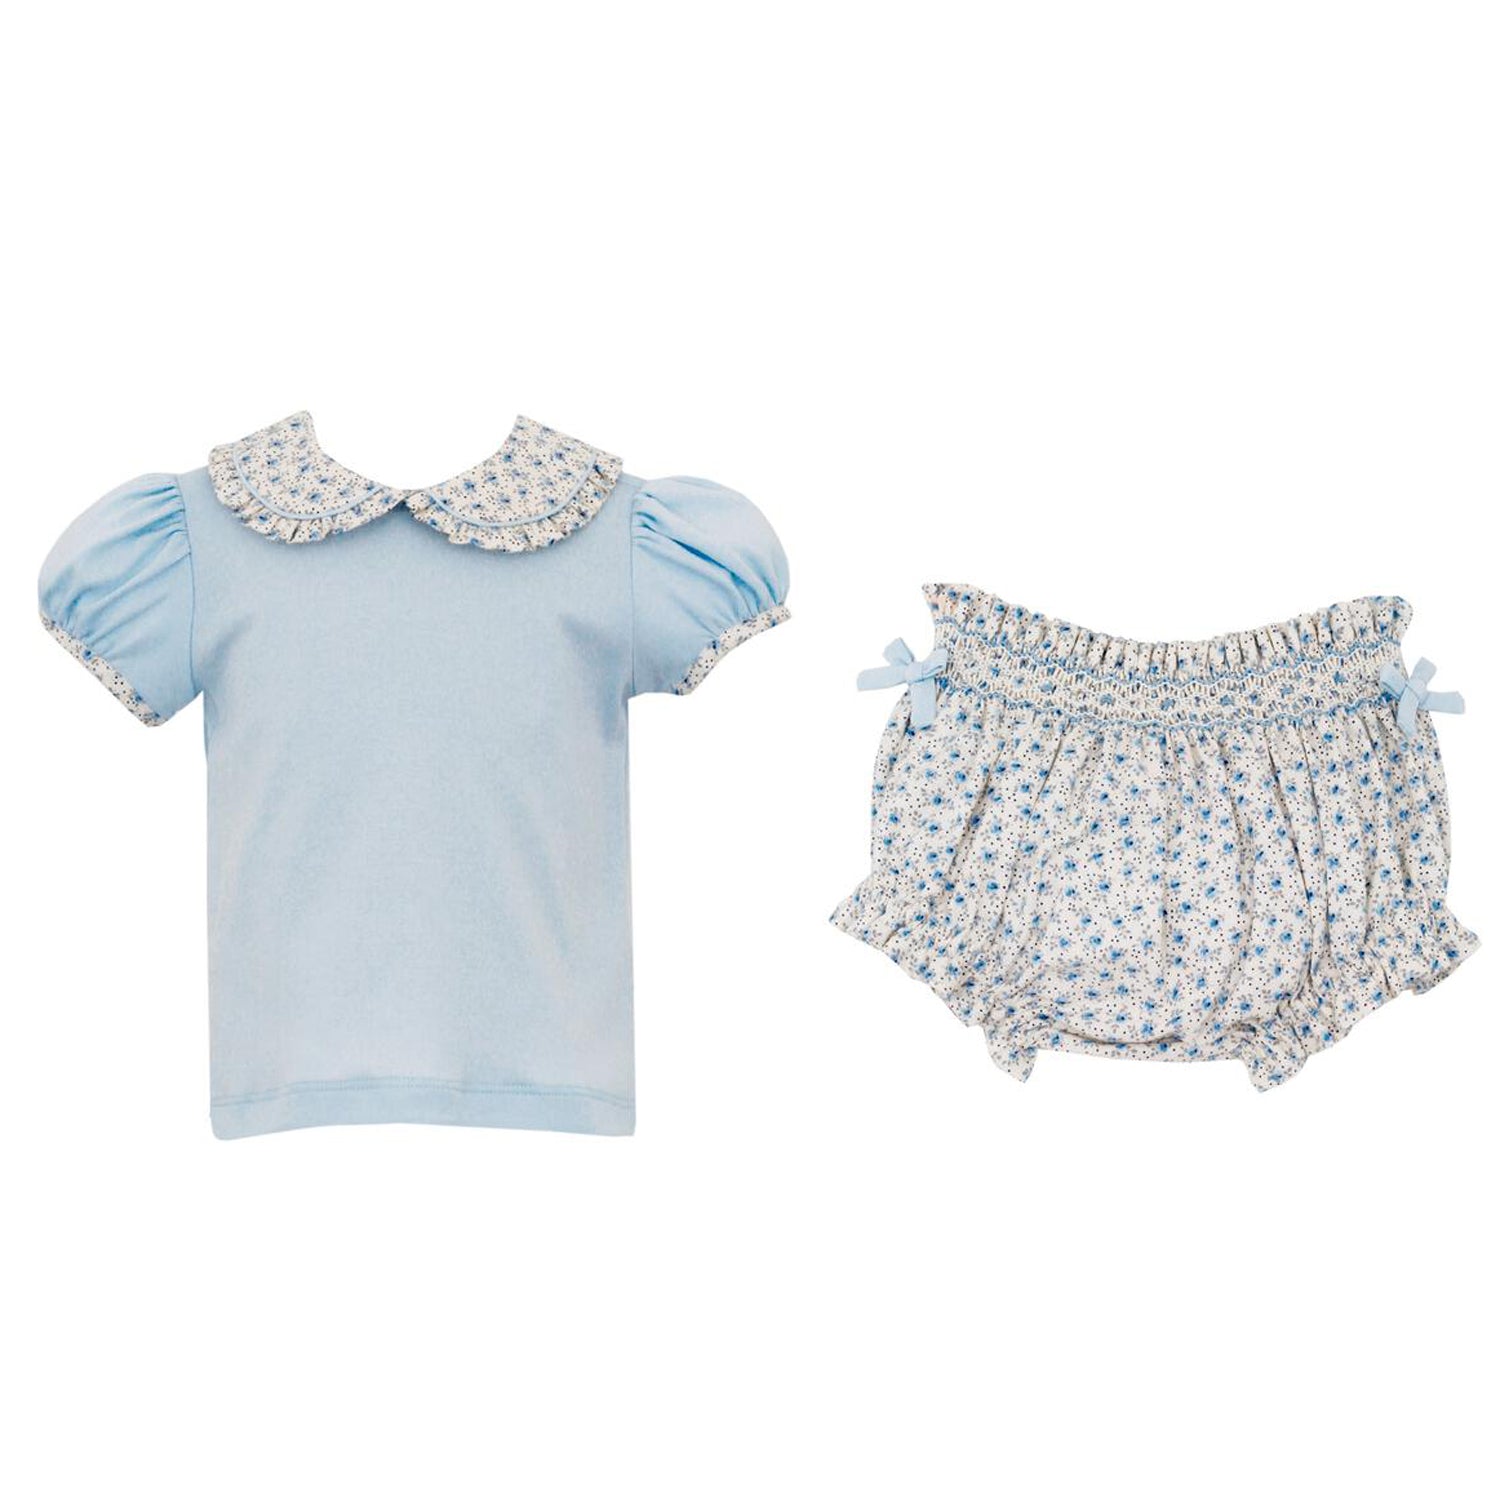 Light Blue Knit Top w/ Floral Collar & Bloomers